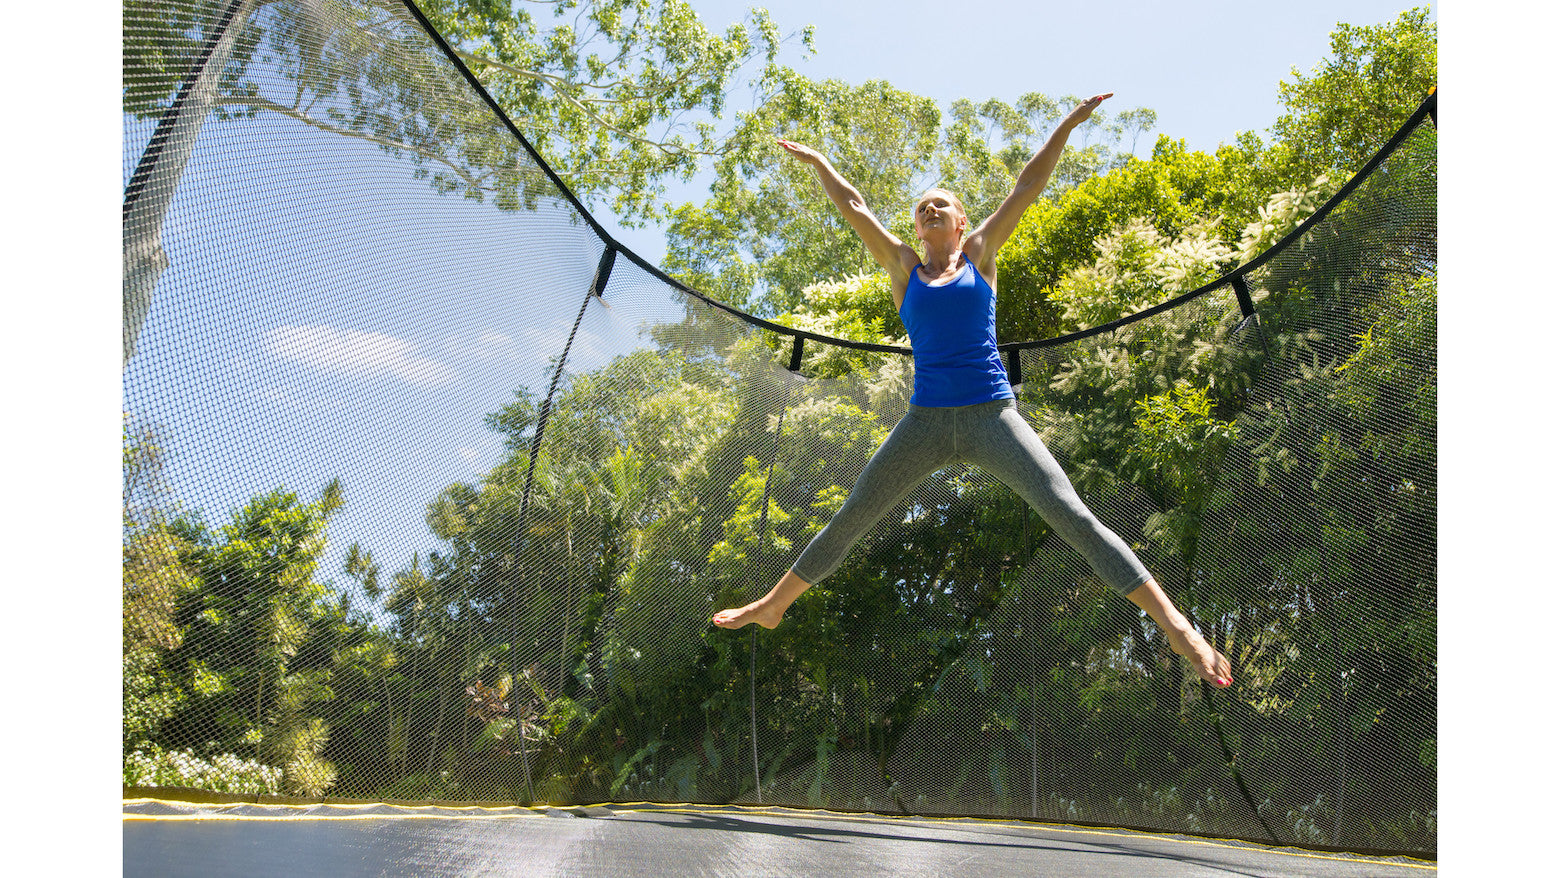 The Bcan Foldable Mini Trampoline Is 35% Off at  Right Now